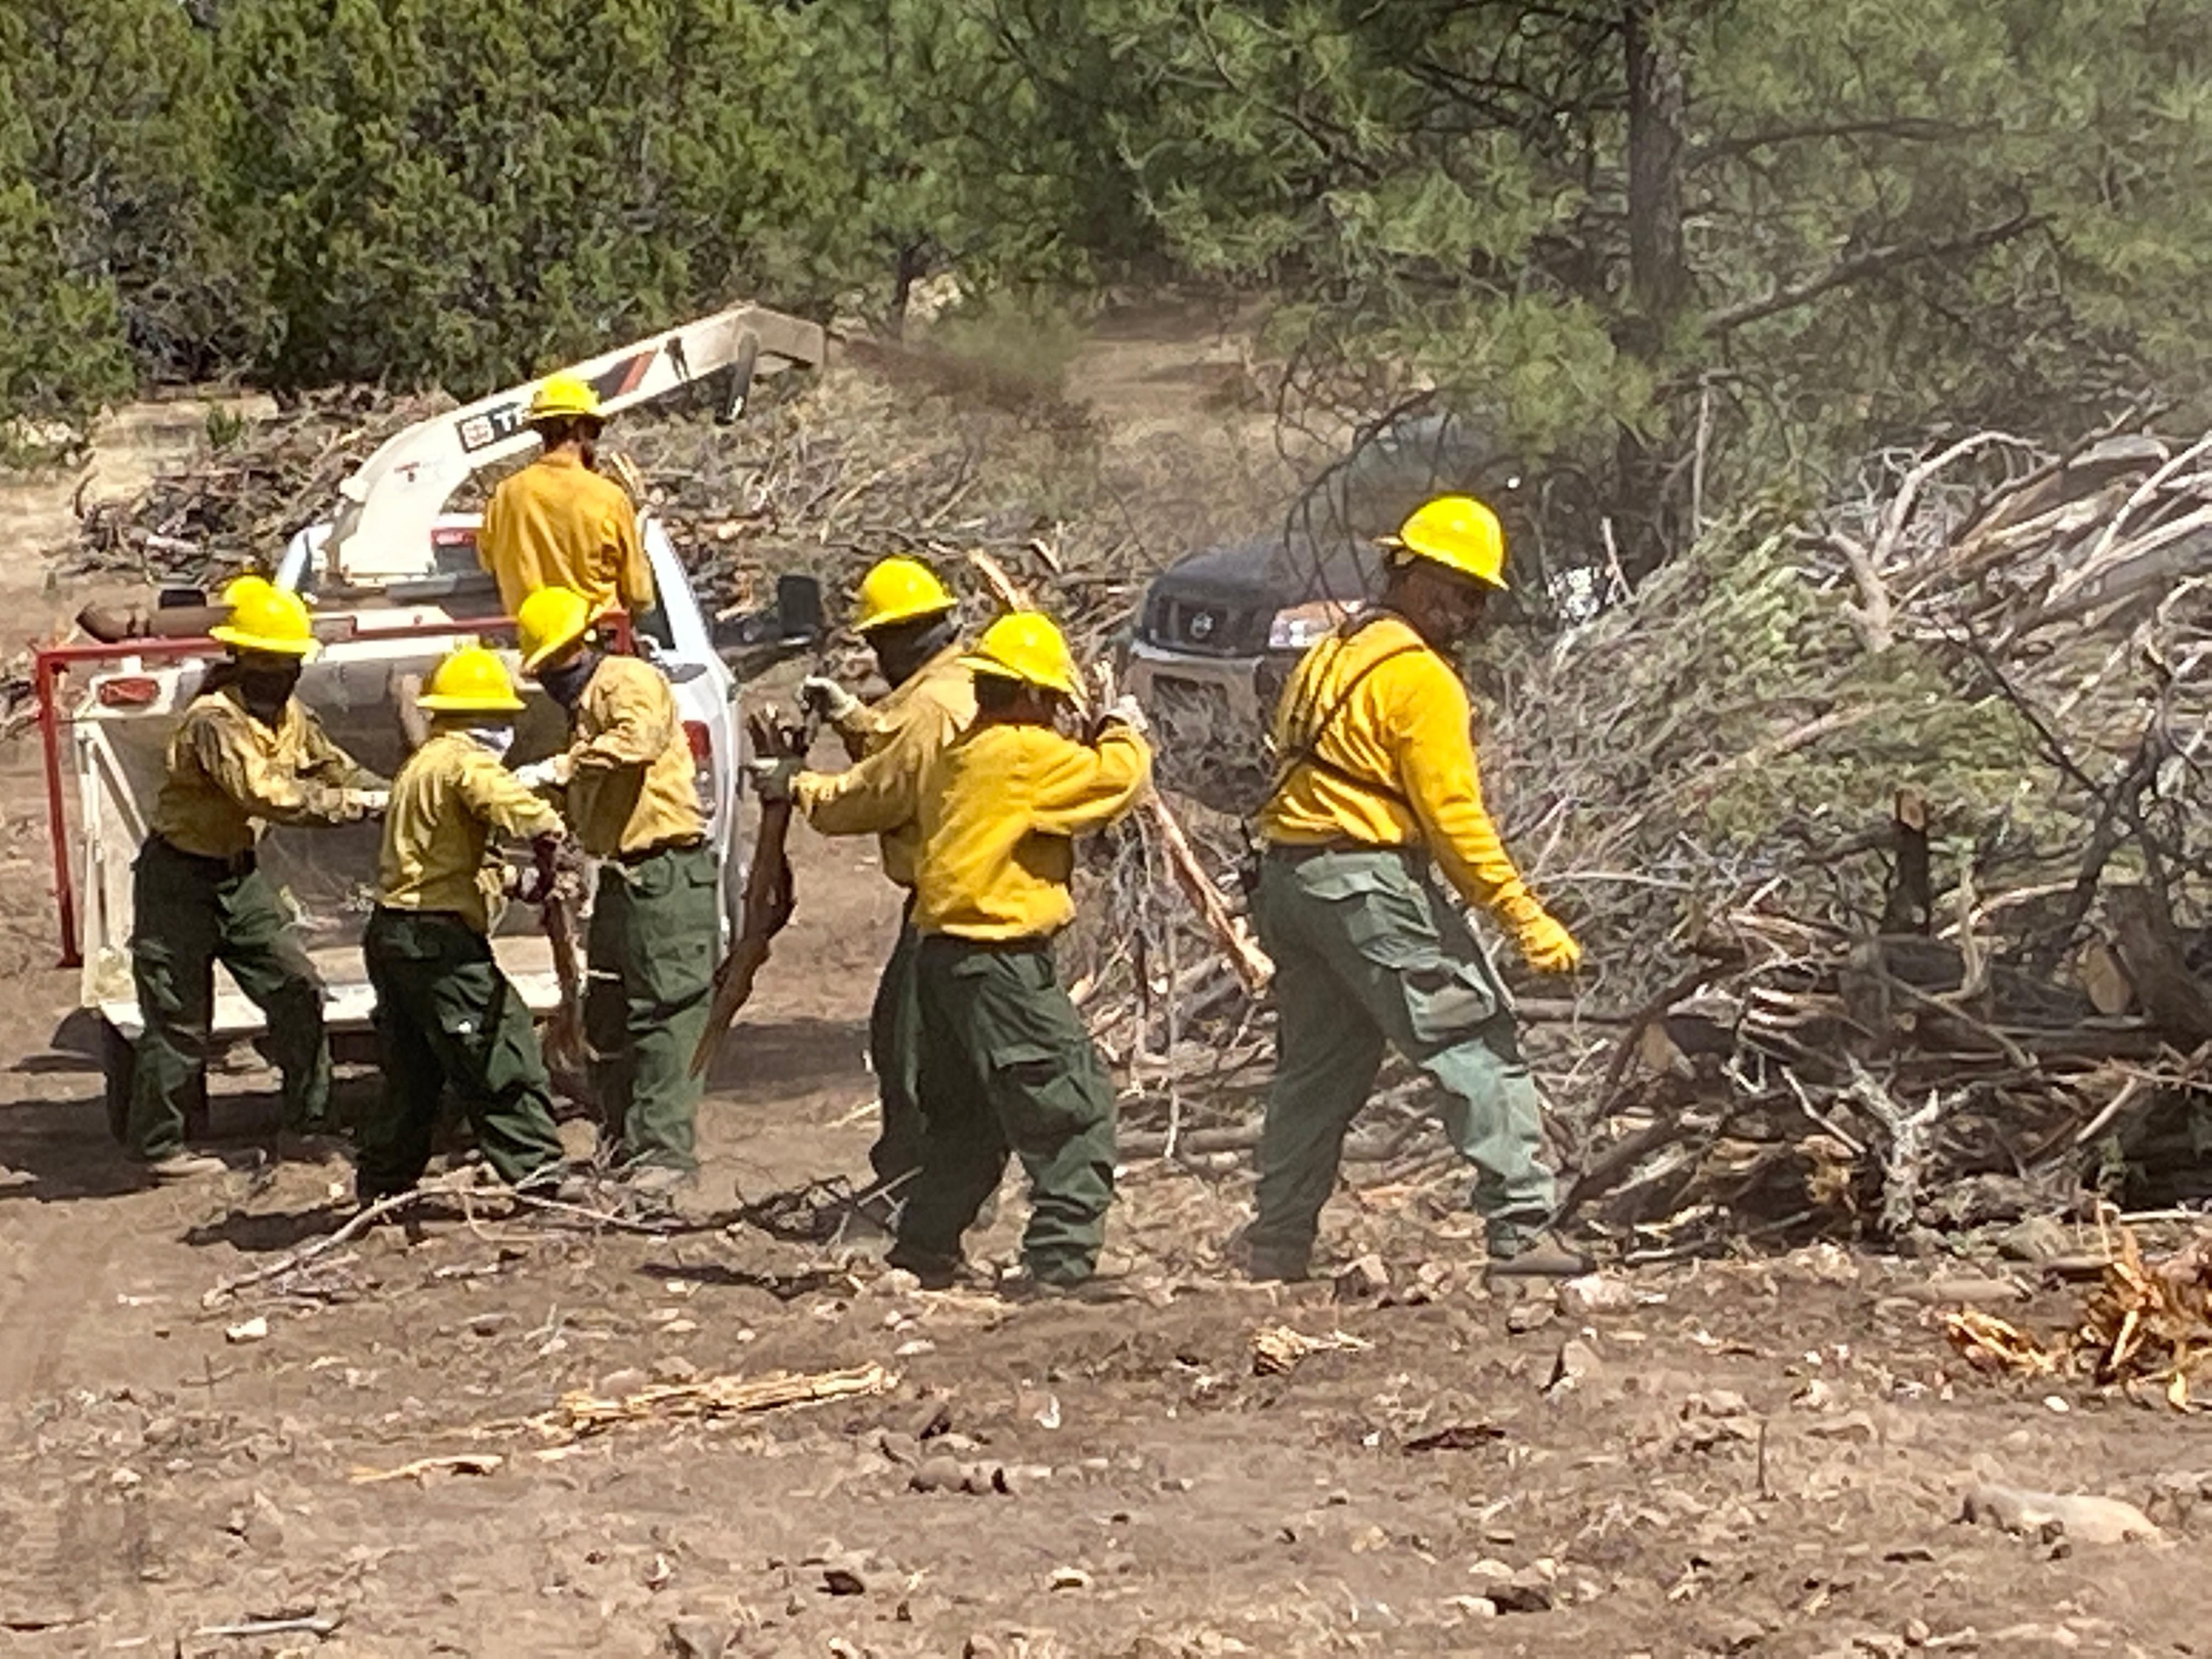 Multiple firefighters in yellow shirts and hardhats lined up with a chipper nearby. Crew passes vegetation down their line to fed into the chipper. Forest in background.